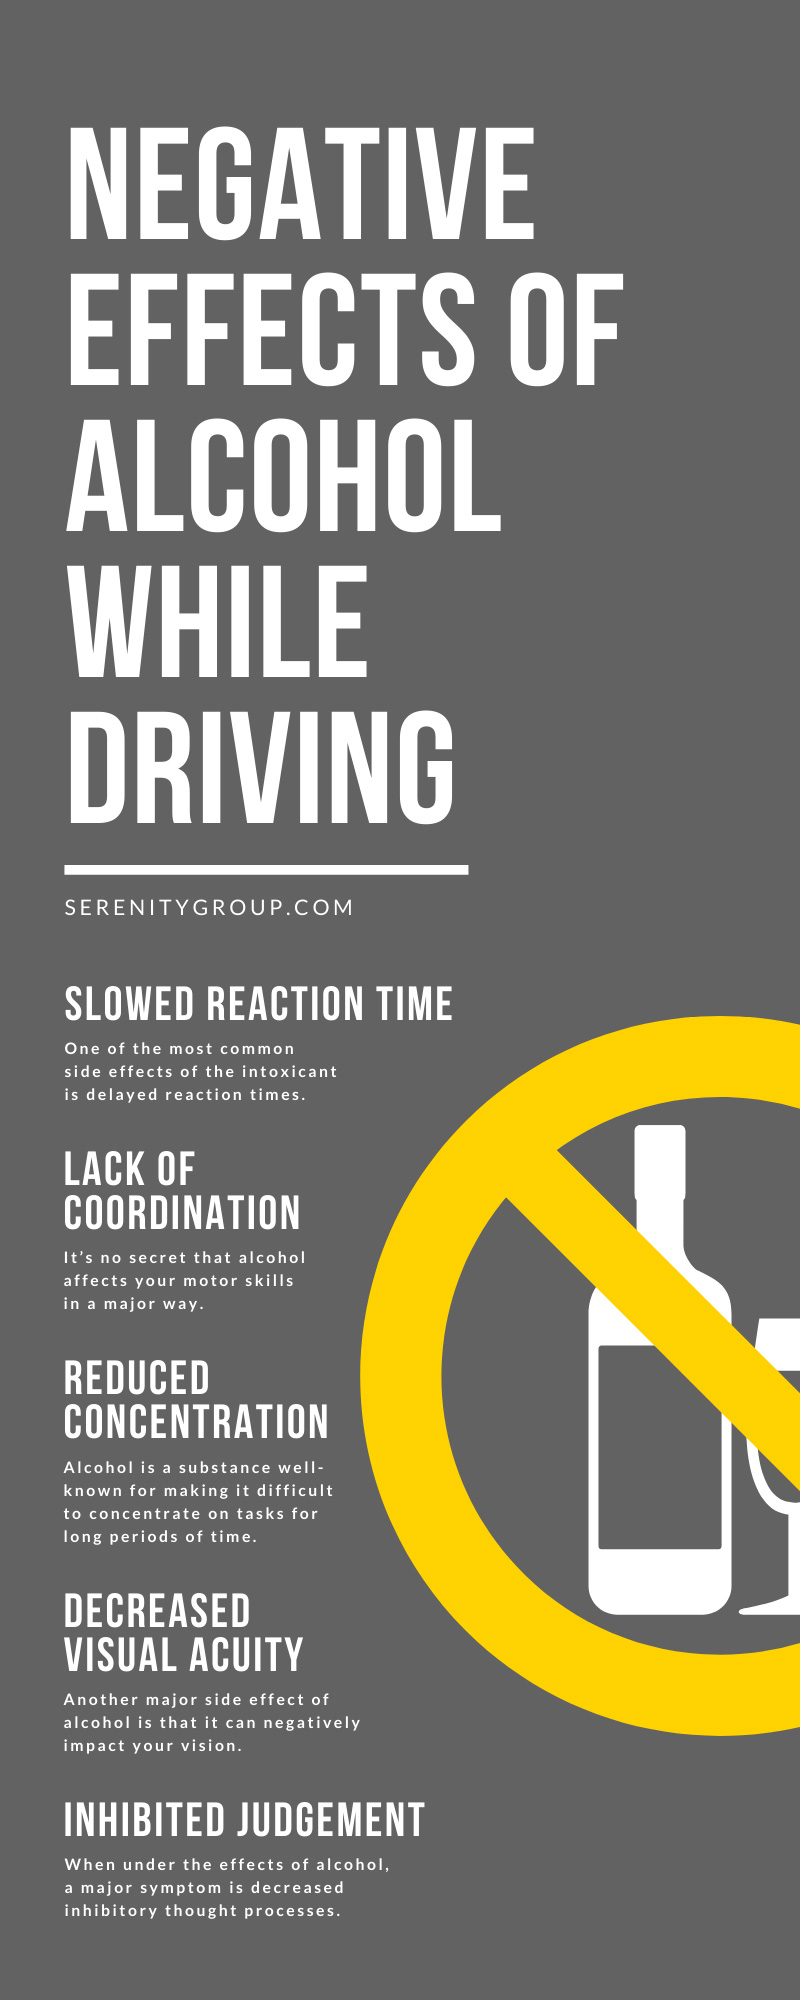 Negative Effects of Alcohol While Driving